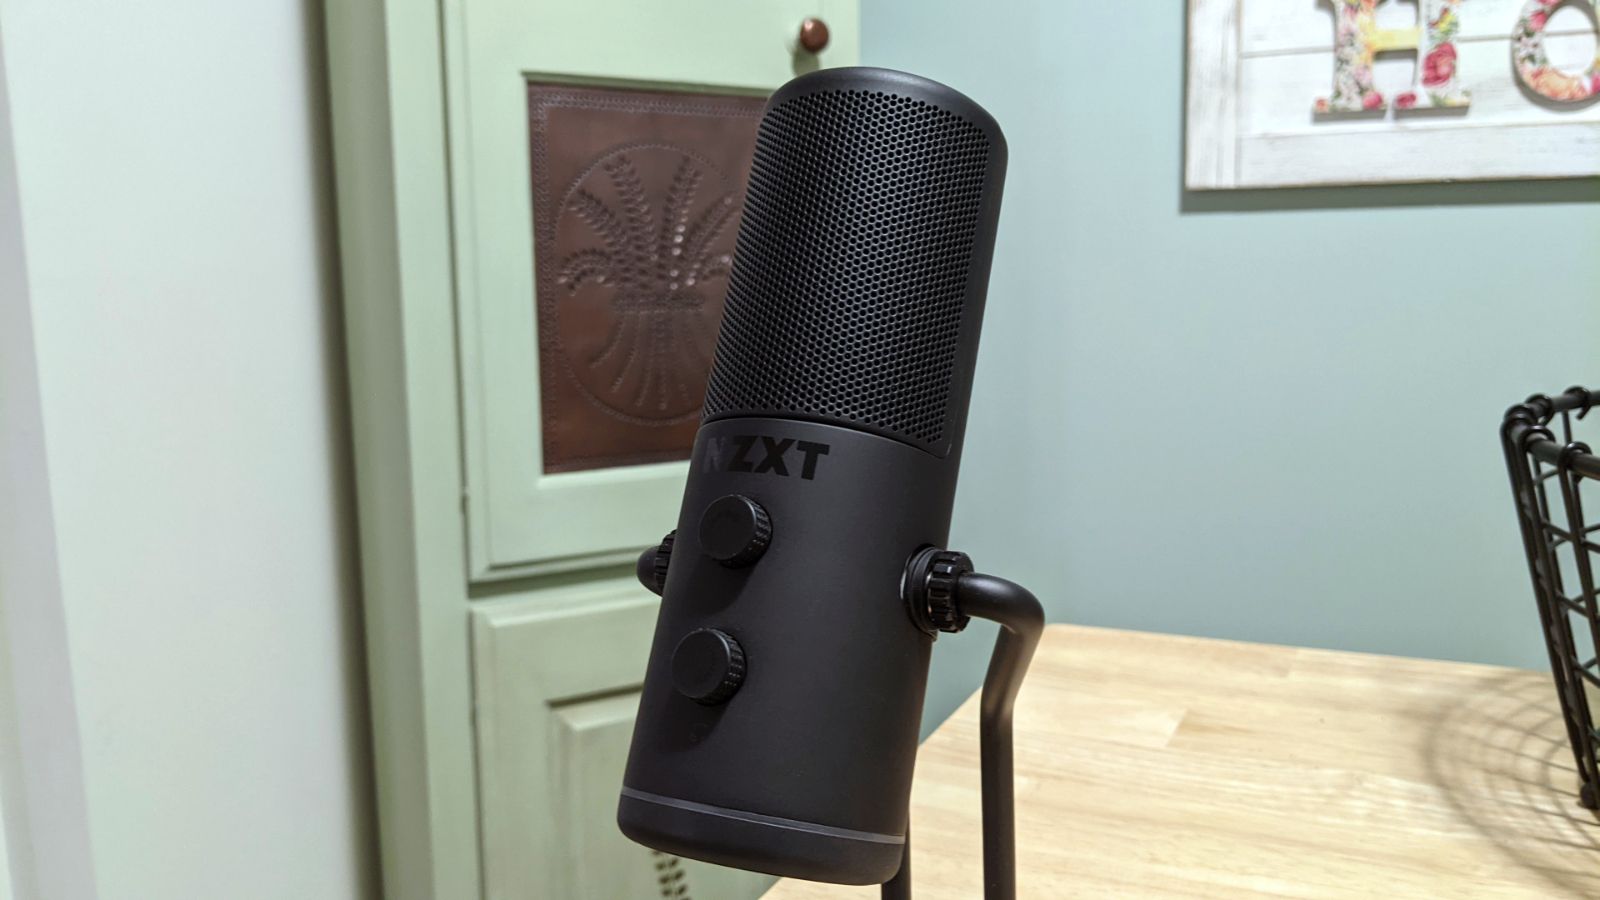 NZXT Capsule microphone on its stand in front of cabinet